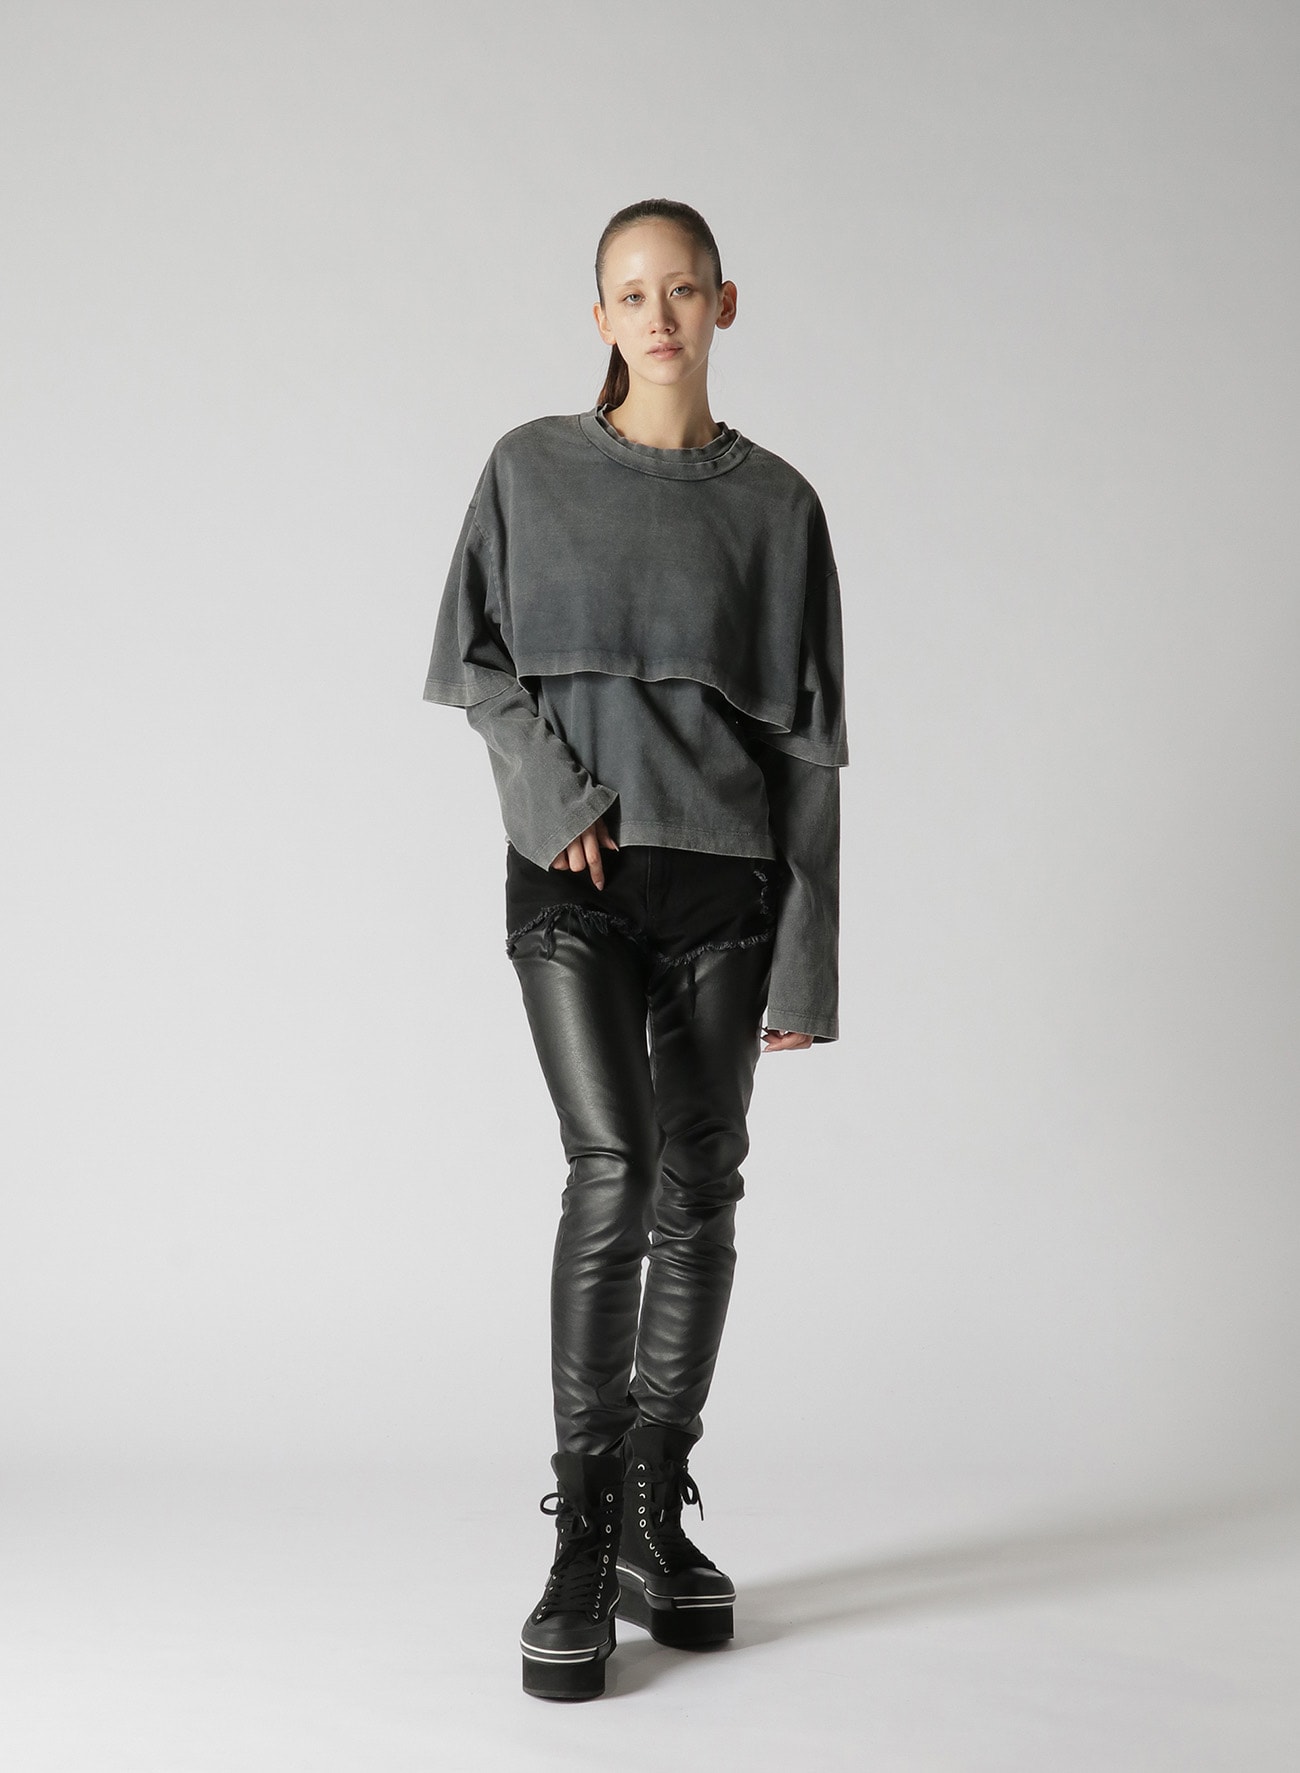 SULFIDE DYED COTTON JERSEY LAYERED SEPARATE LONG T-SHIRT